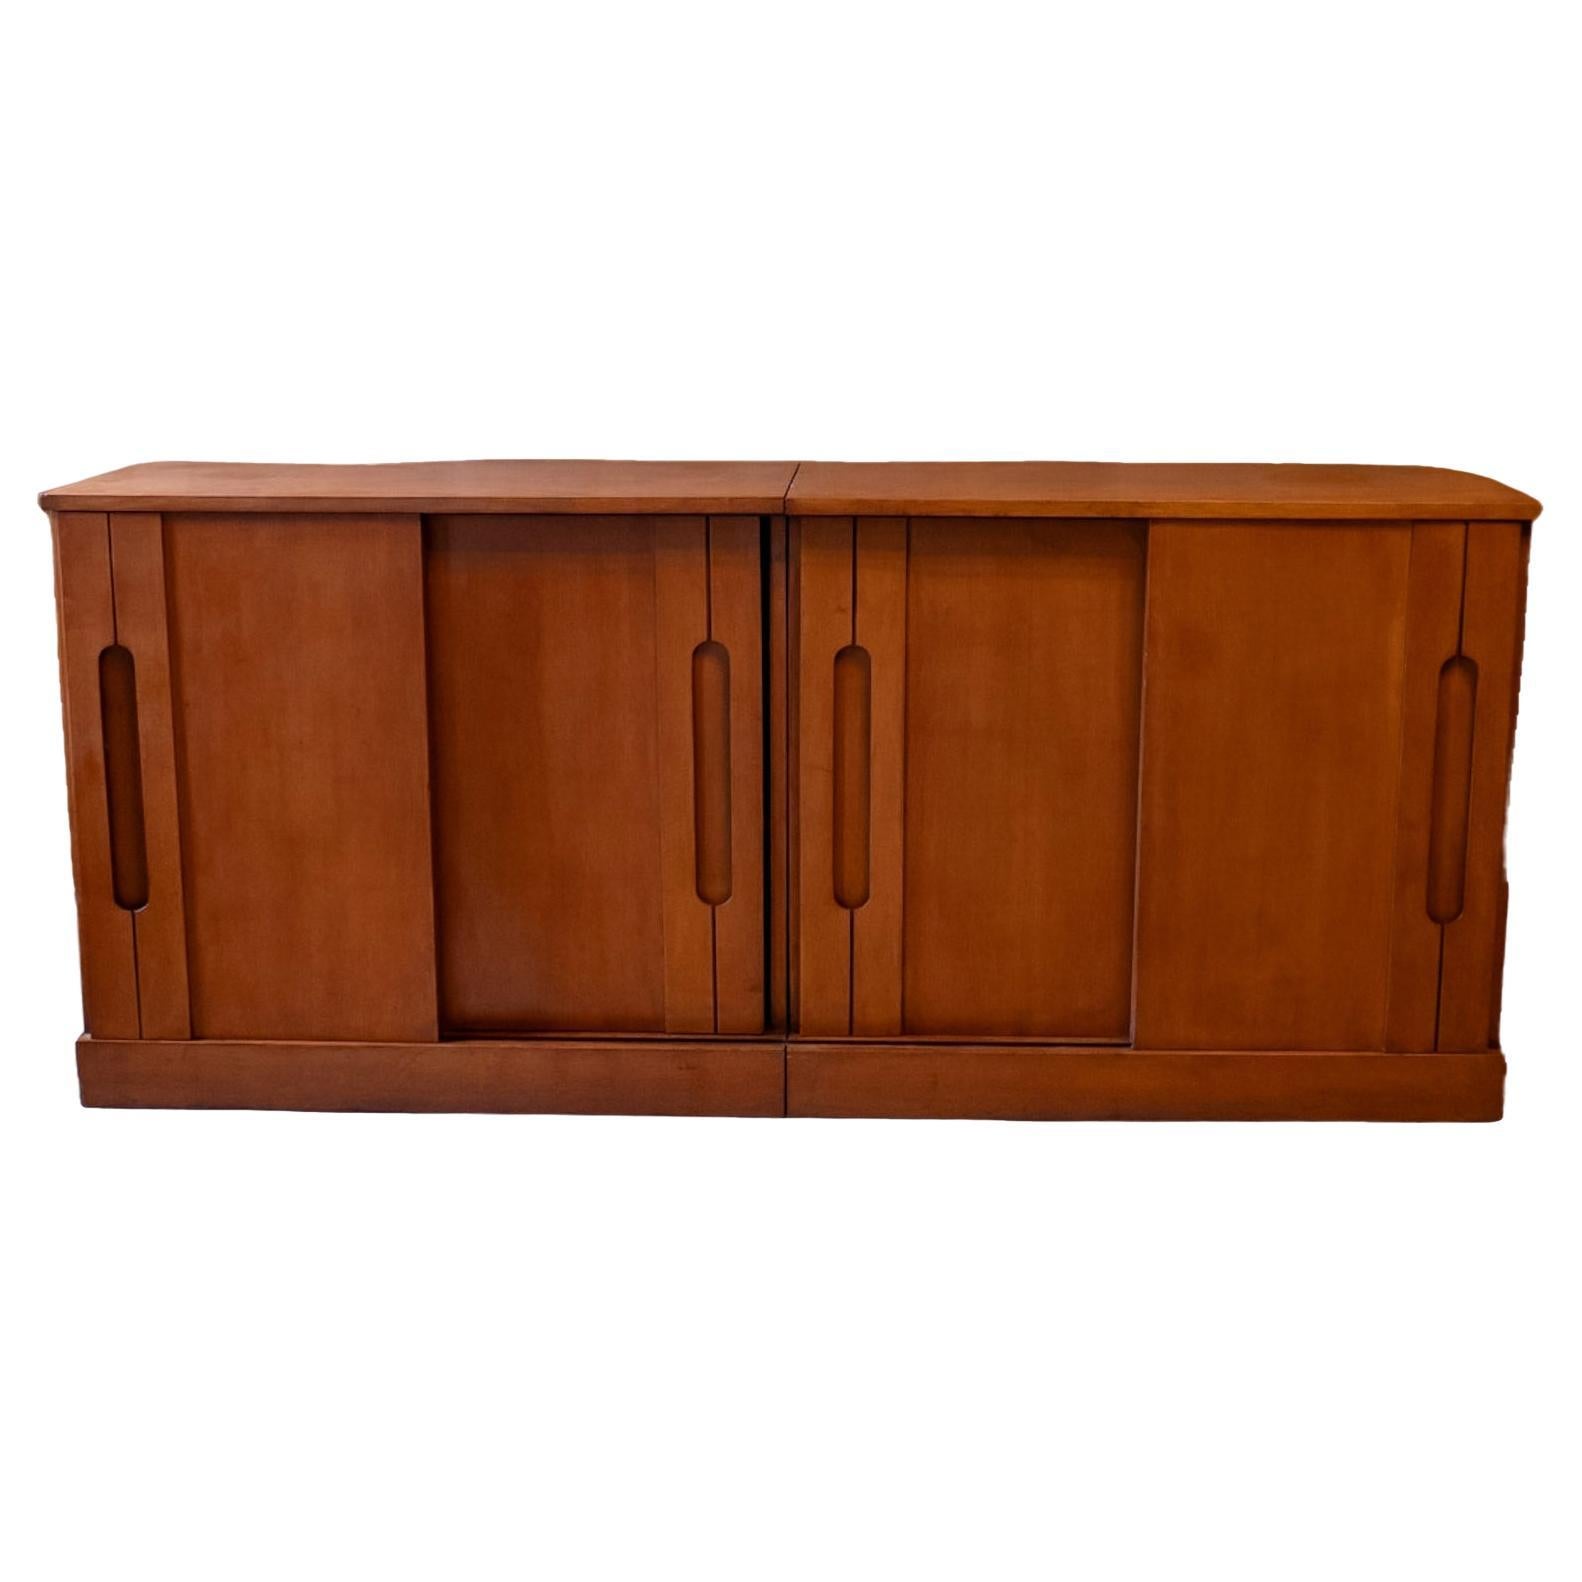 Mid-Century Modern Wooden Sideboard by Achilli, Bridigini and Canella, 1960s For Sale